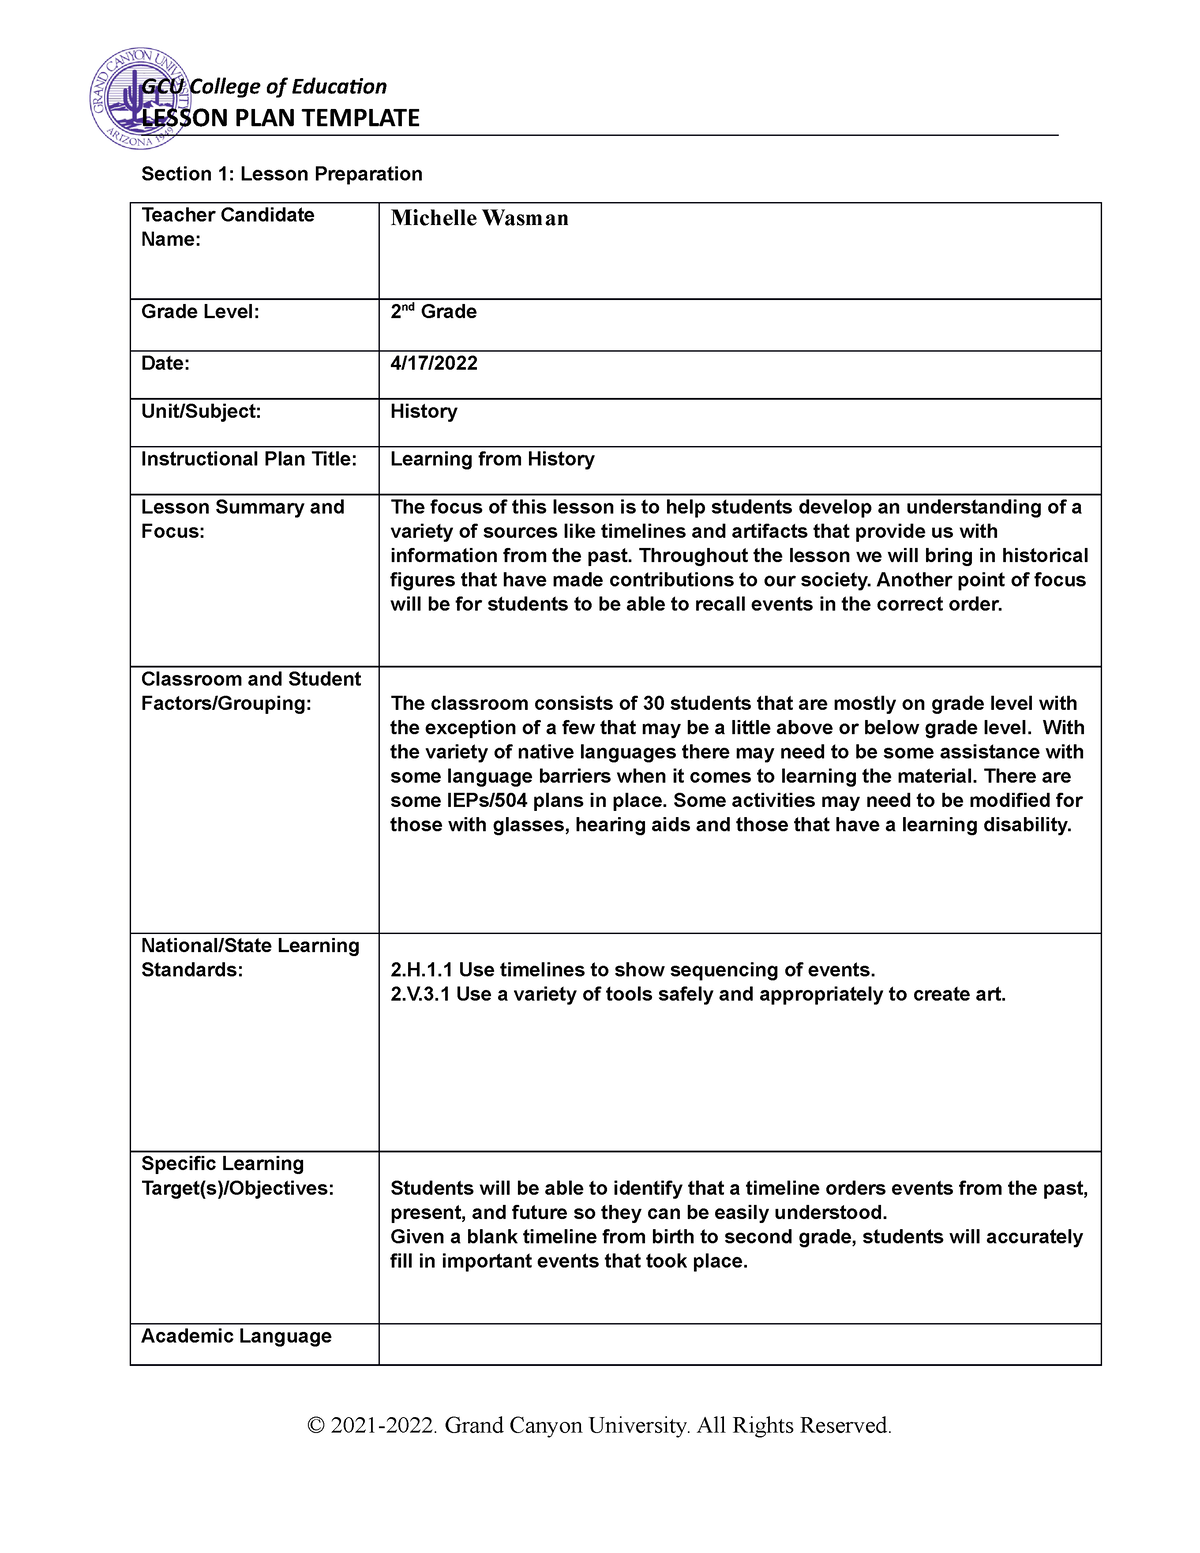 history-lesson-plan-lesson-plan-template-section-1-lesson-preparation-teacher-candidate-name